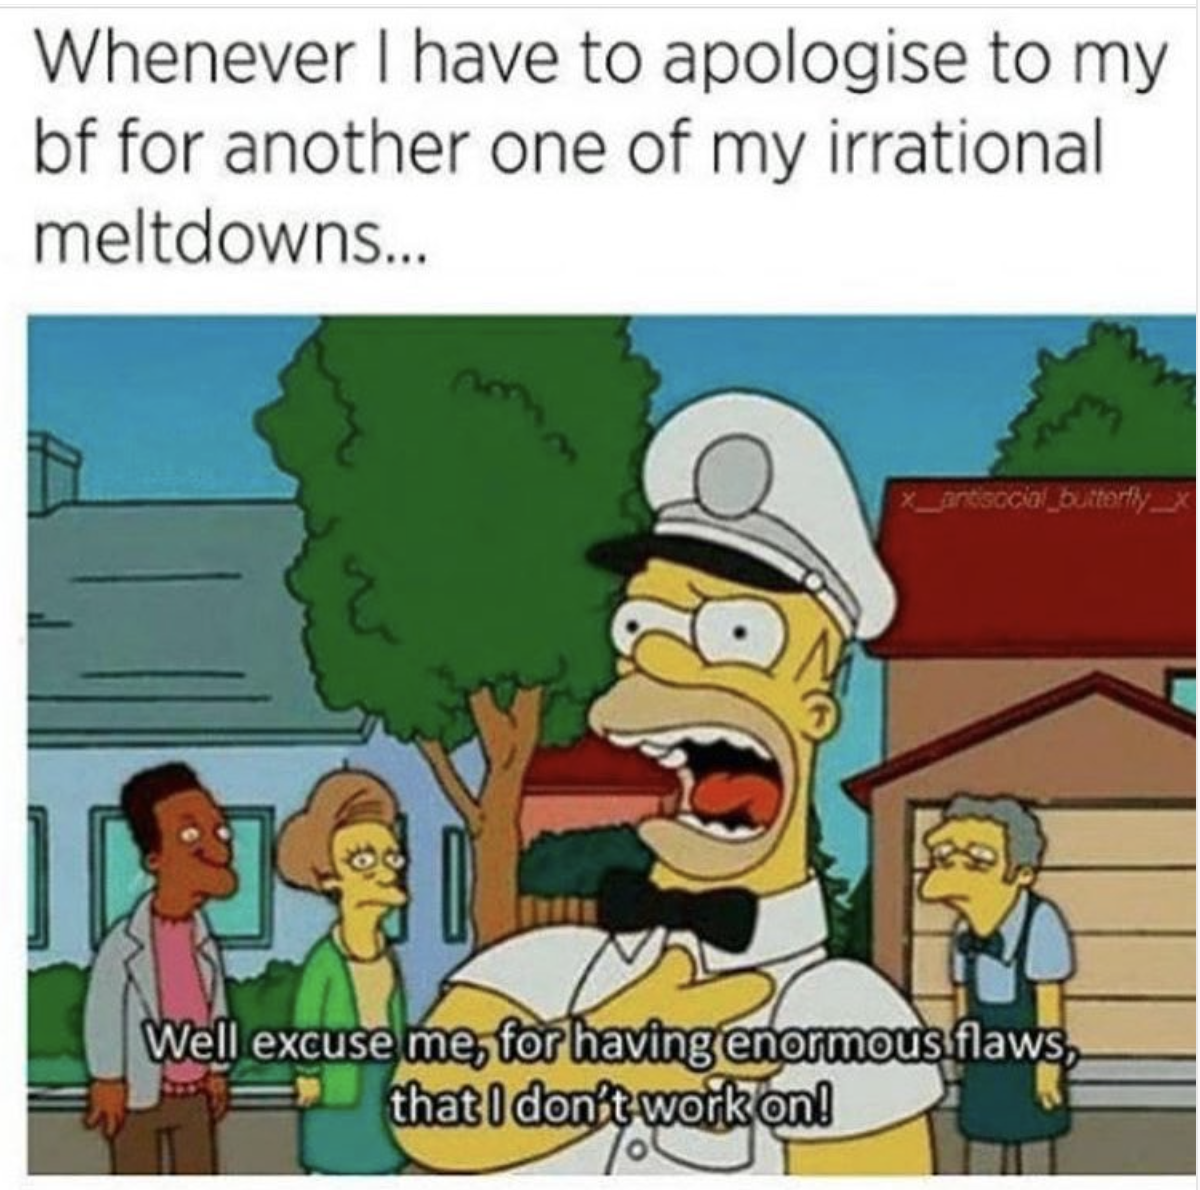 simpsons logic - Whenever I have to apologise to my bf for another one of my irrational meltdowns... Well excuse me, for having enormous flaws, that I don't work on!